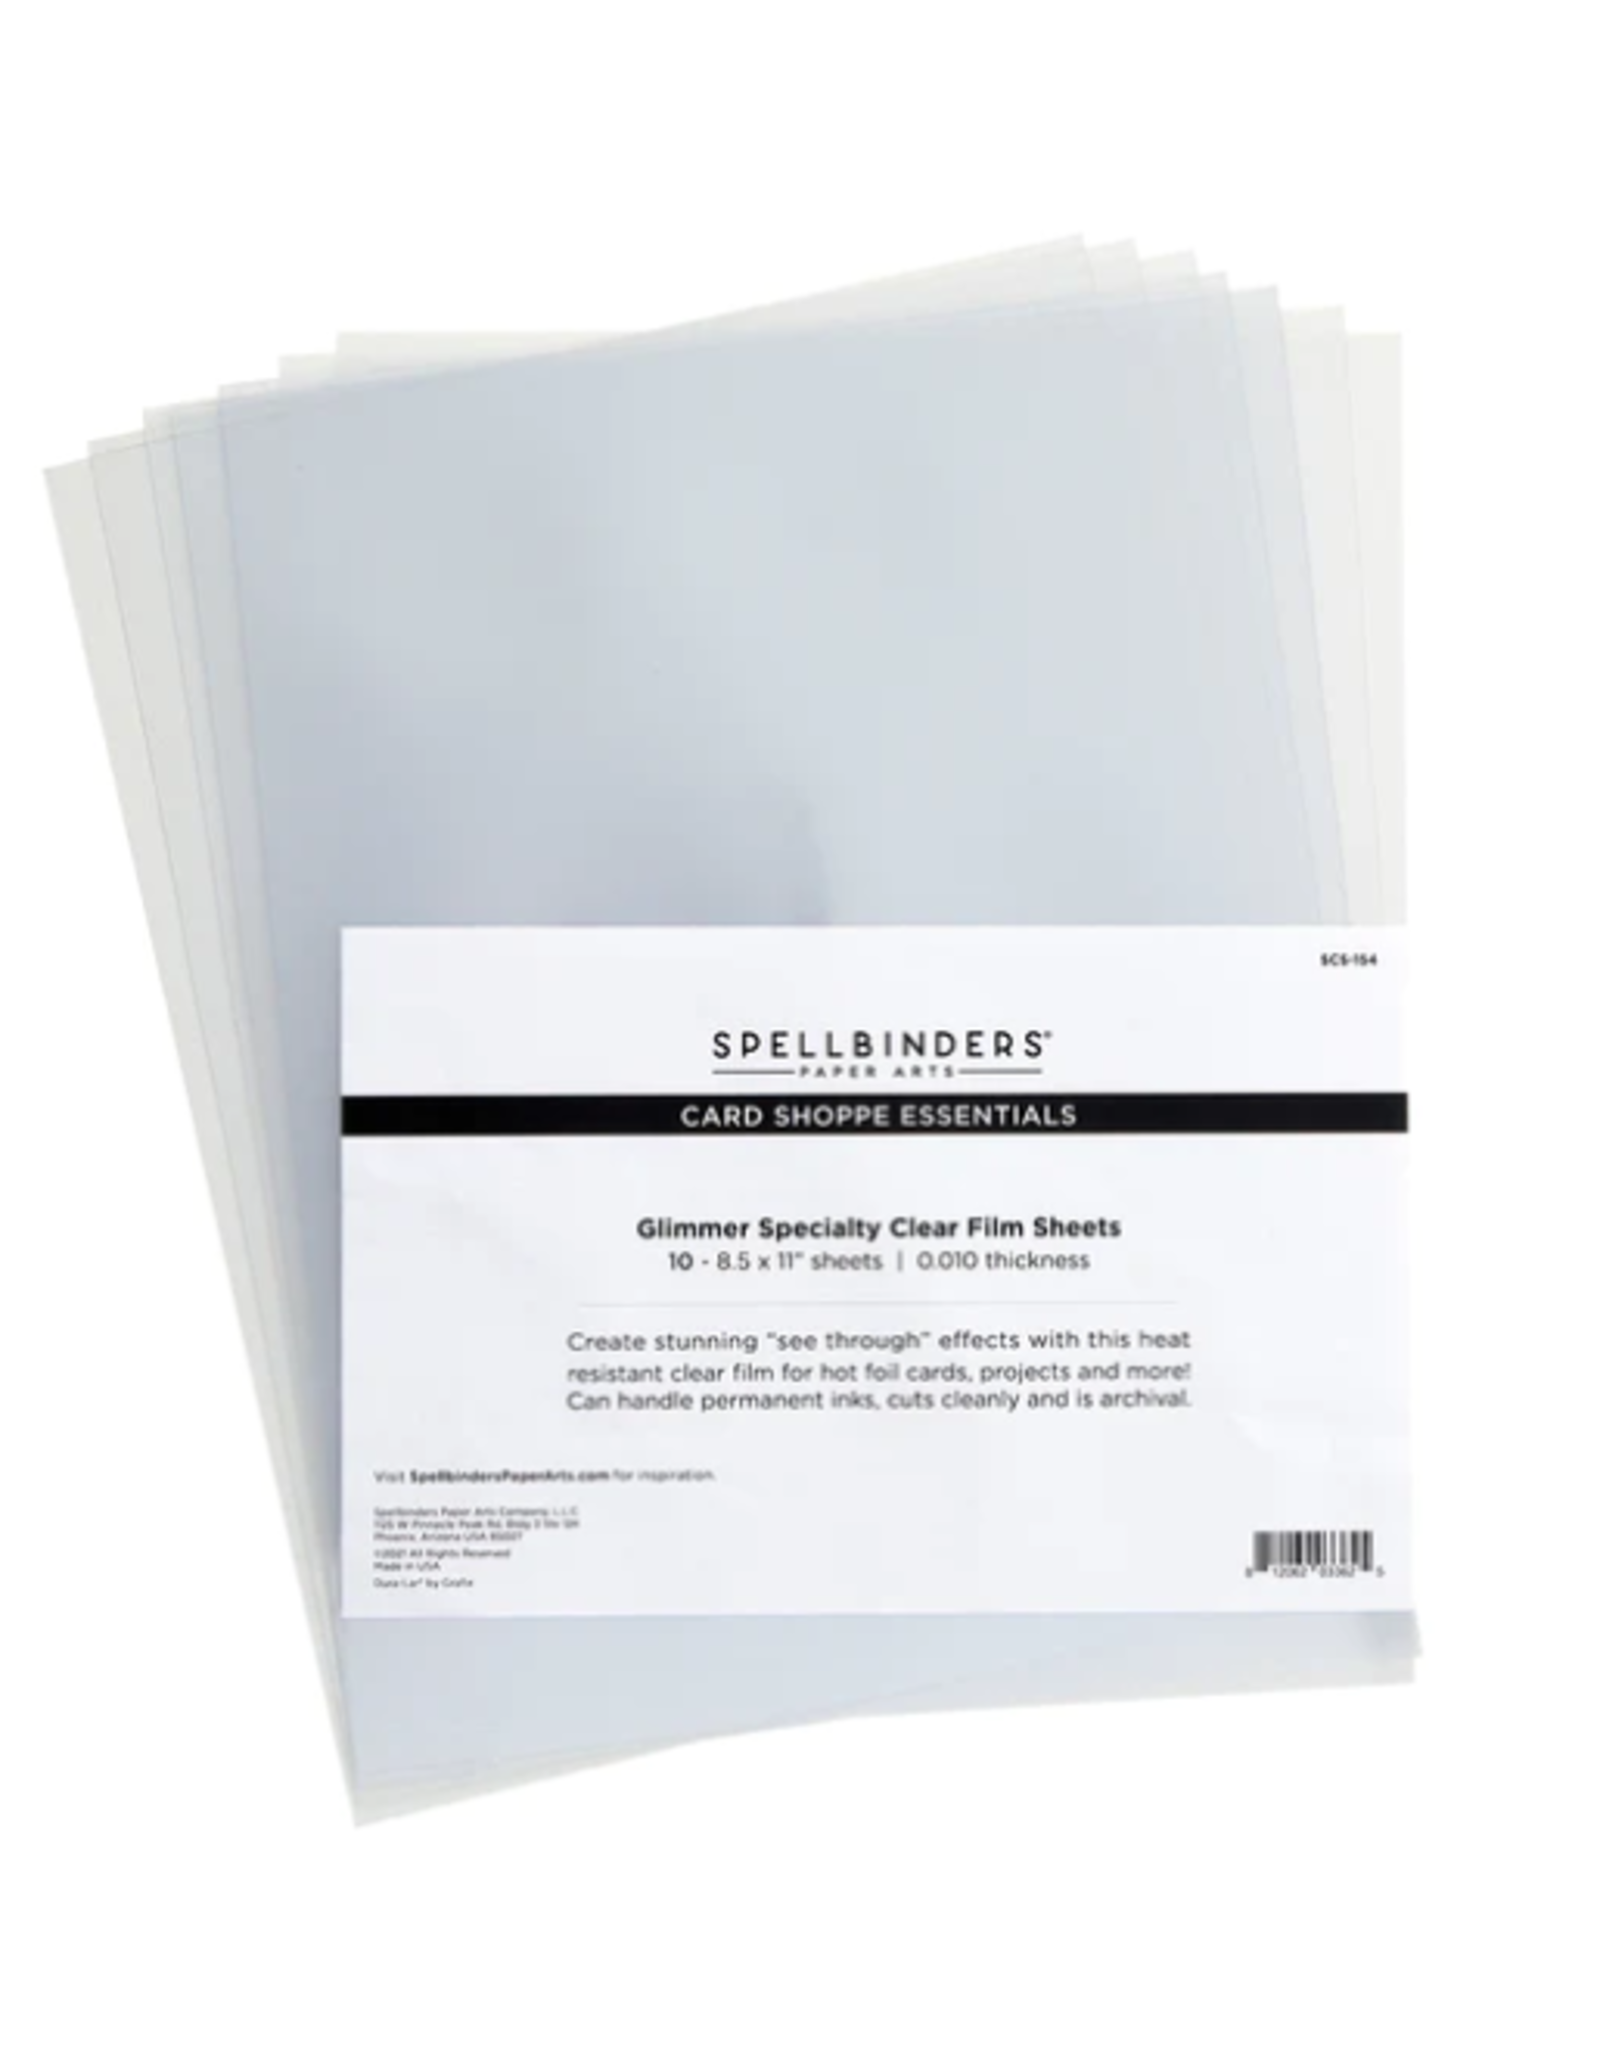 SPELLBINDERS SPELLBINDERS GLIMMER SPECIALITY CARD SHOPPE ESSENTIALS CLEAR FILM SHEETS 8.5x11 10/PK